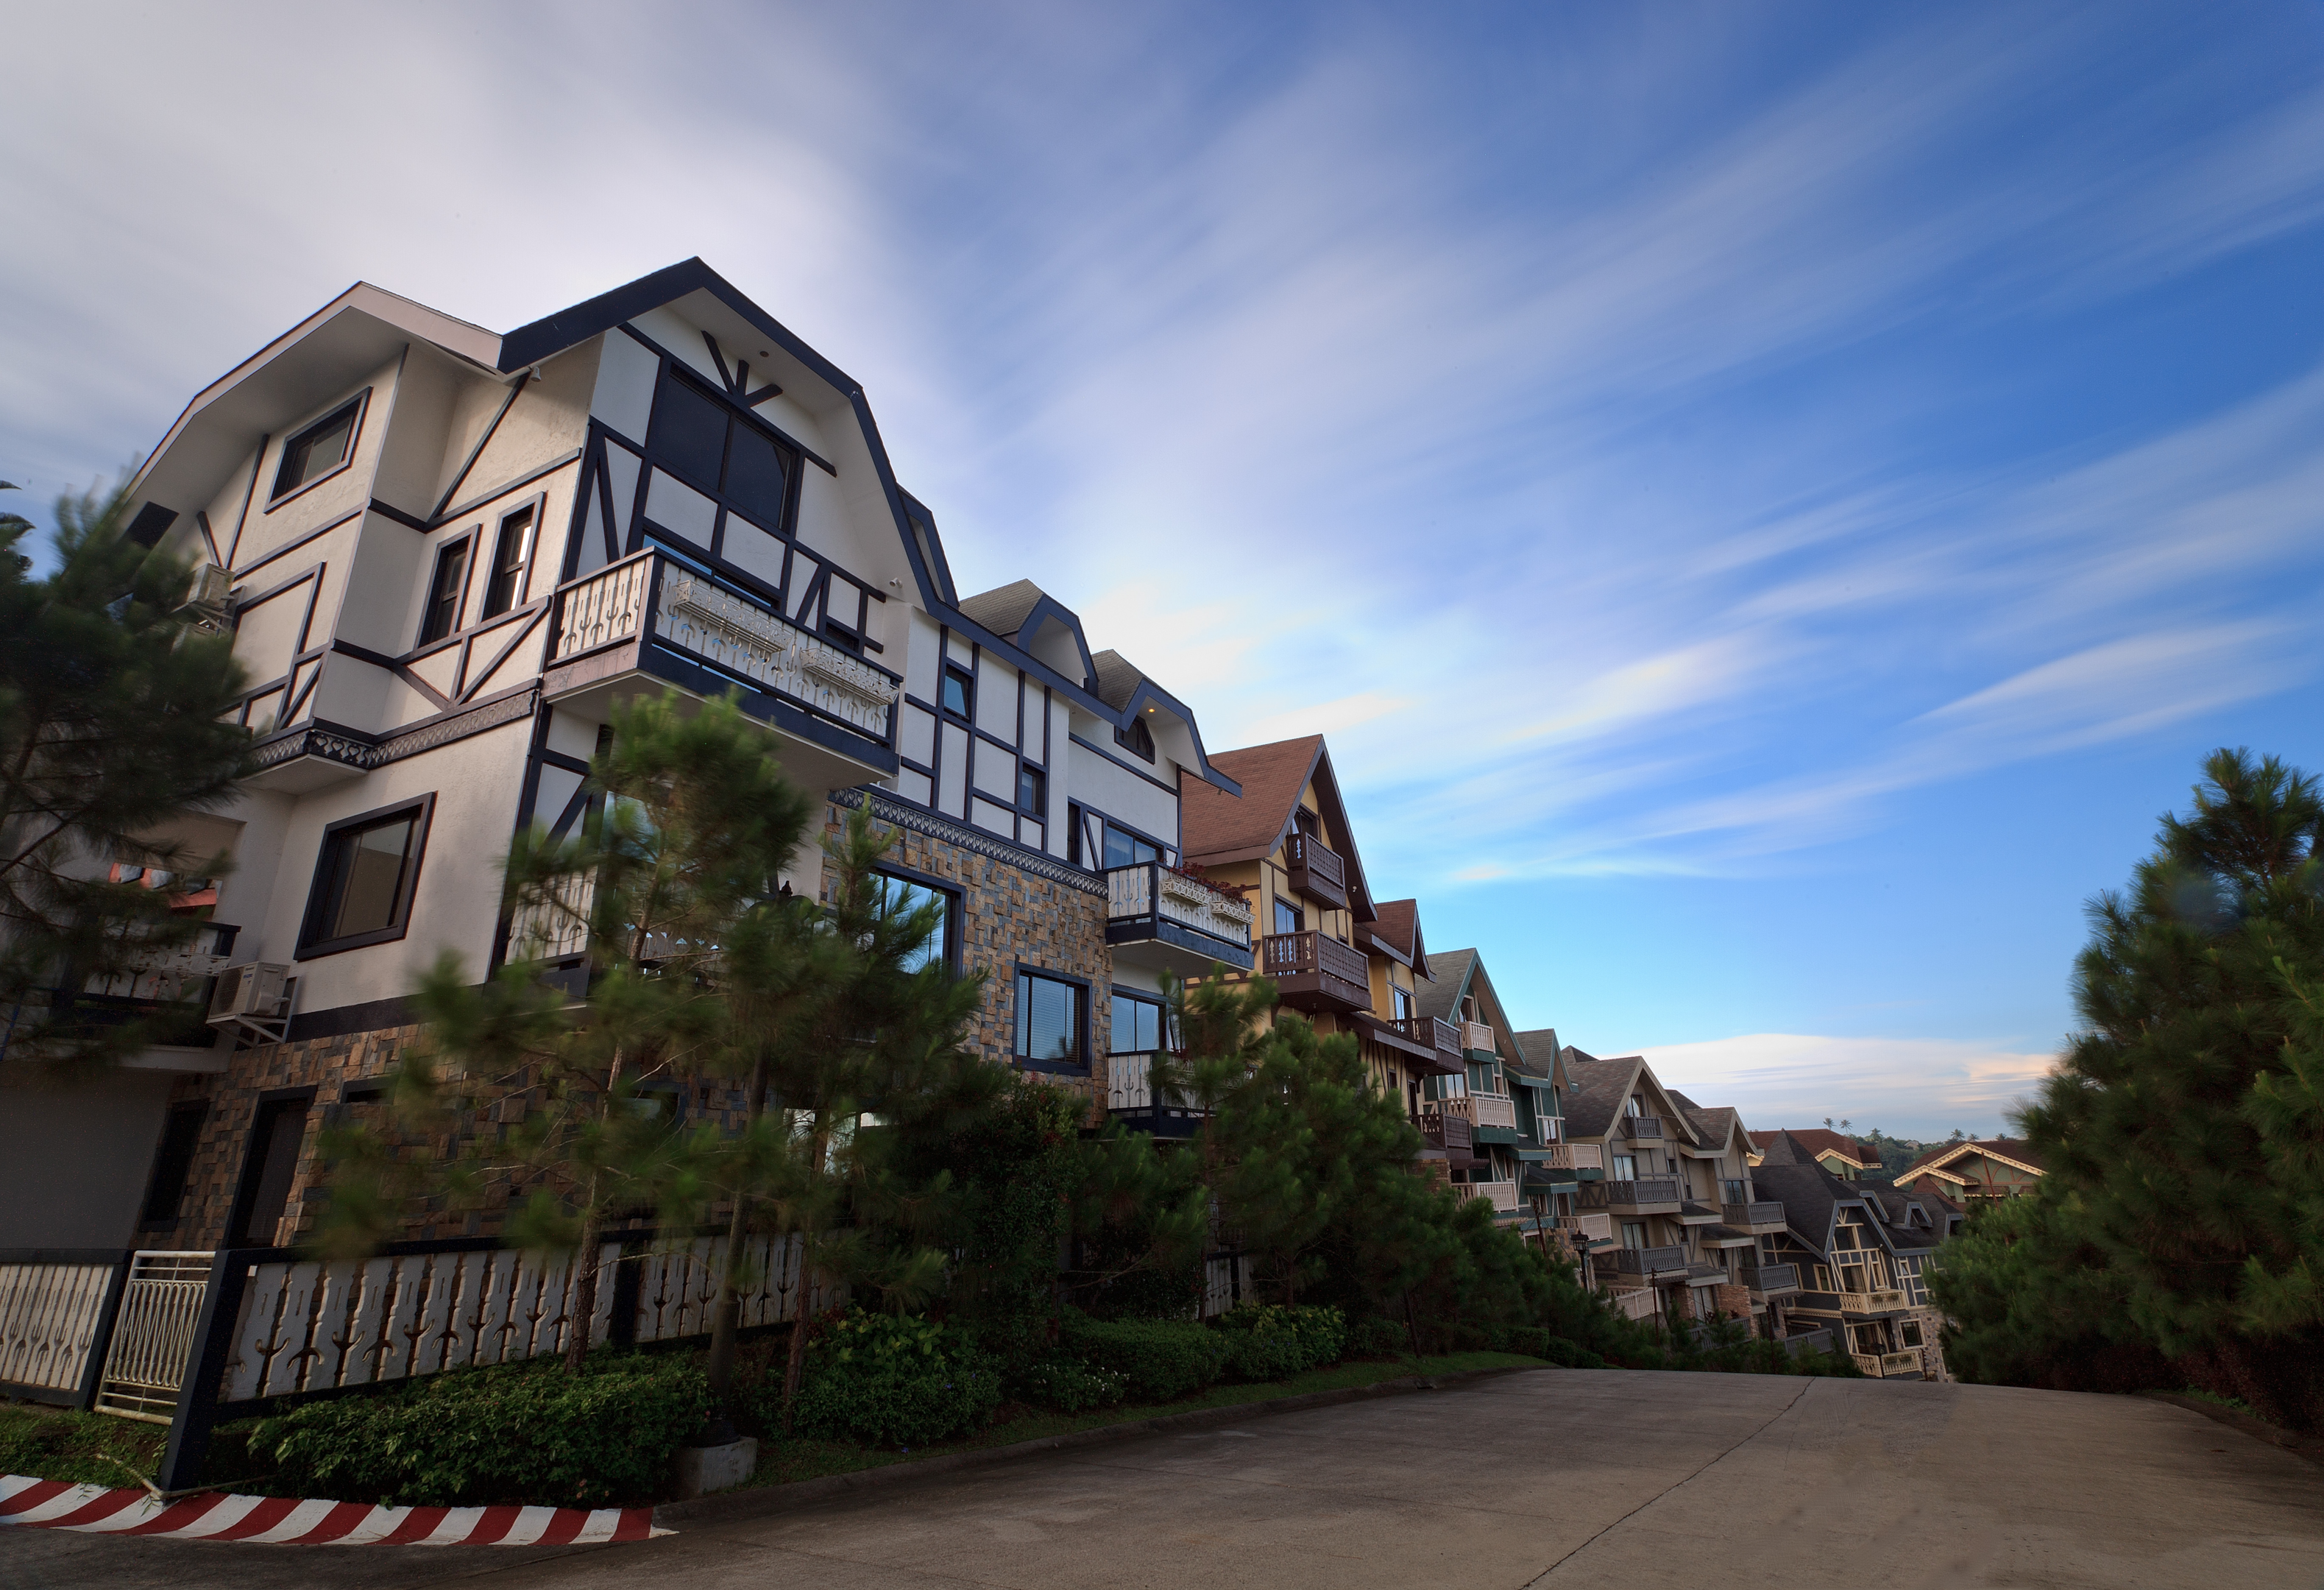 Swiss chalets located within the luxury community of Crosswinds Tagaytay